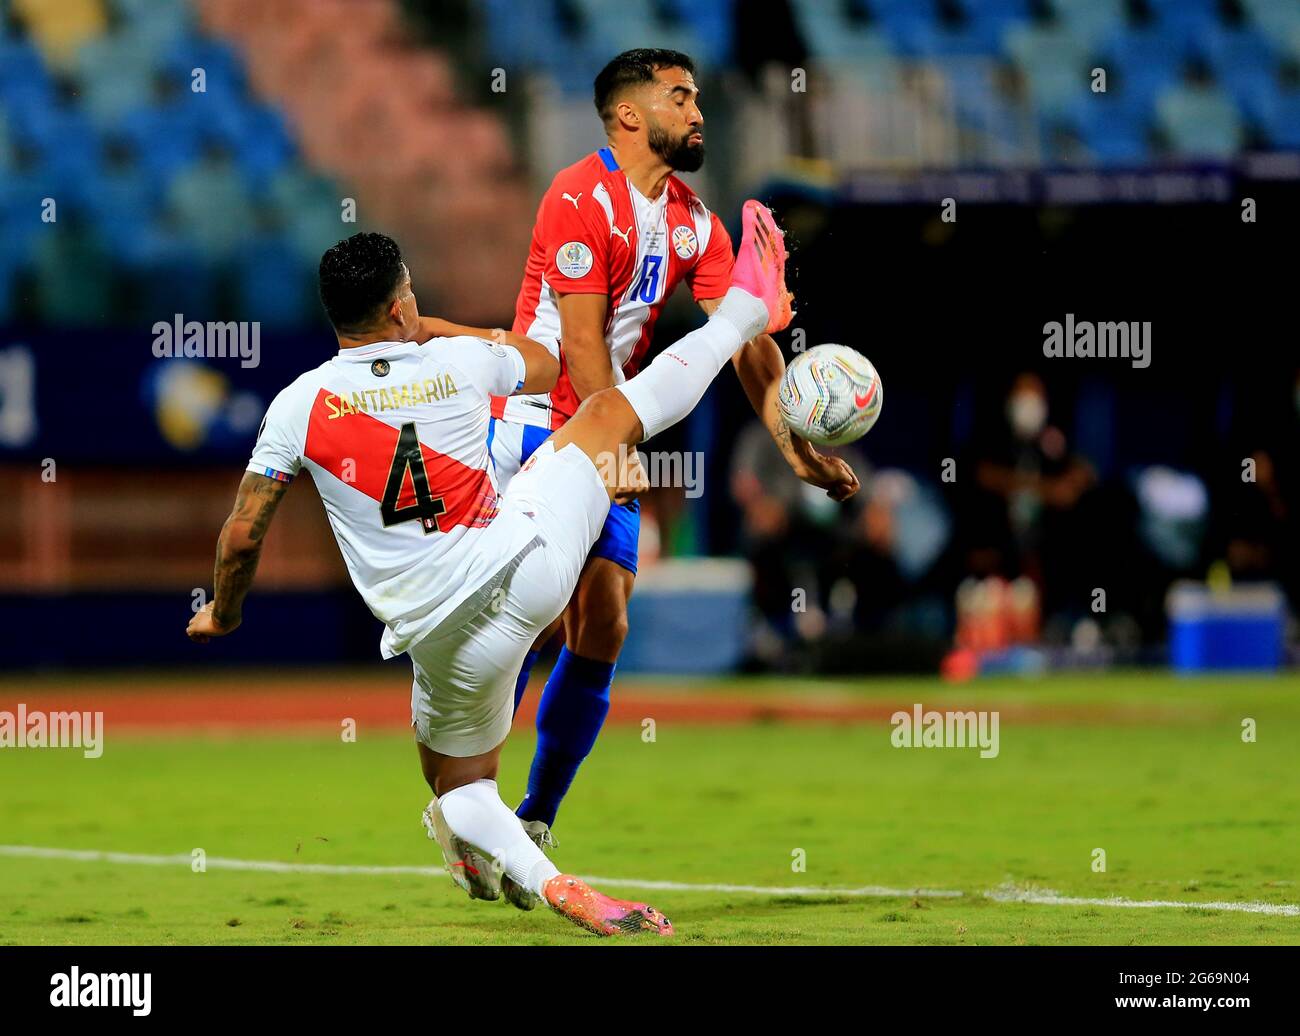 GOIANIA, BRAZIL - JULY 02: Alberto Espinola of Paraguay competes for the ball with Anderson Santamaria of Peru ,during the Quarterfinal match between Peru and Paraguay as part of Conmebol Copa America Brazil 2021 at Estadio Olimpico on July 2, 2021 in Goiania, Brazil. (MB Media) Stock Photo